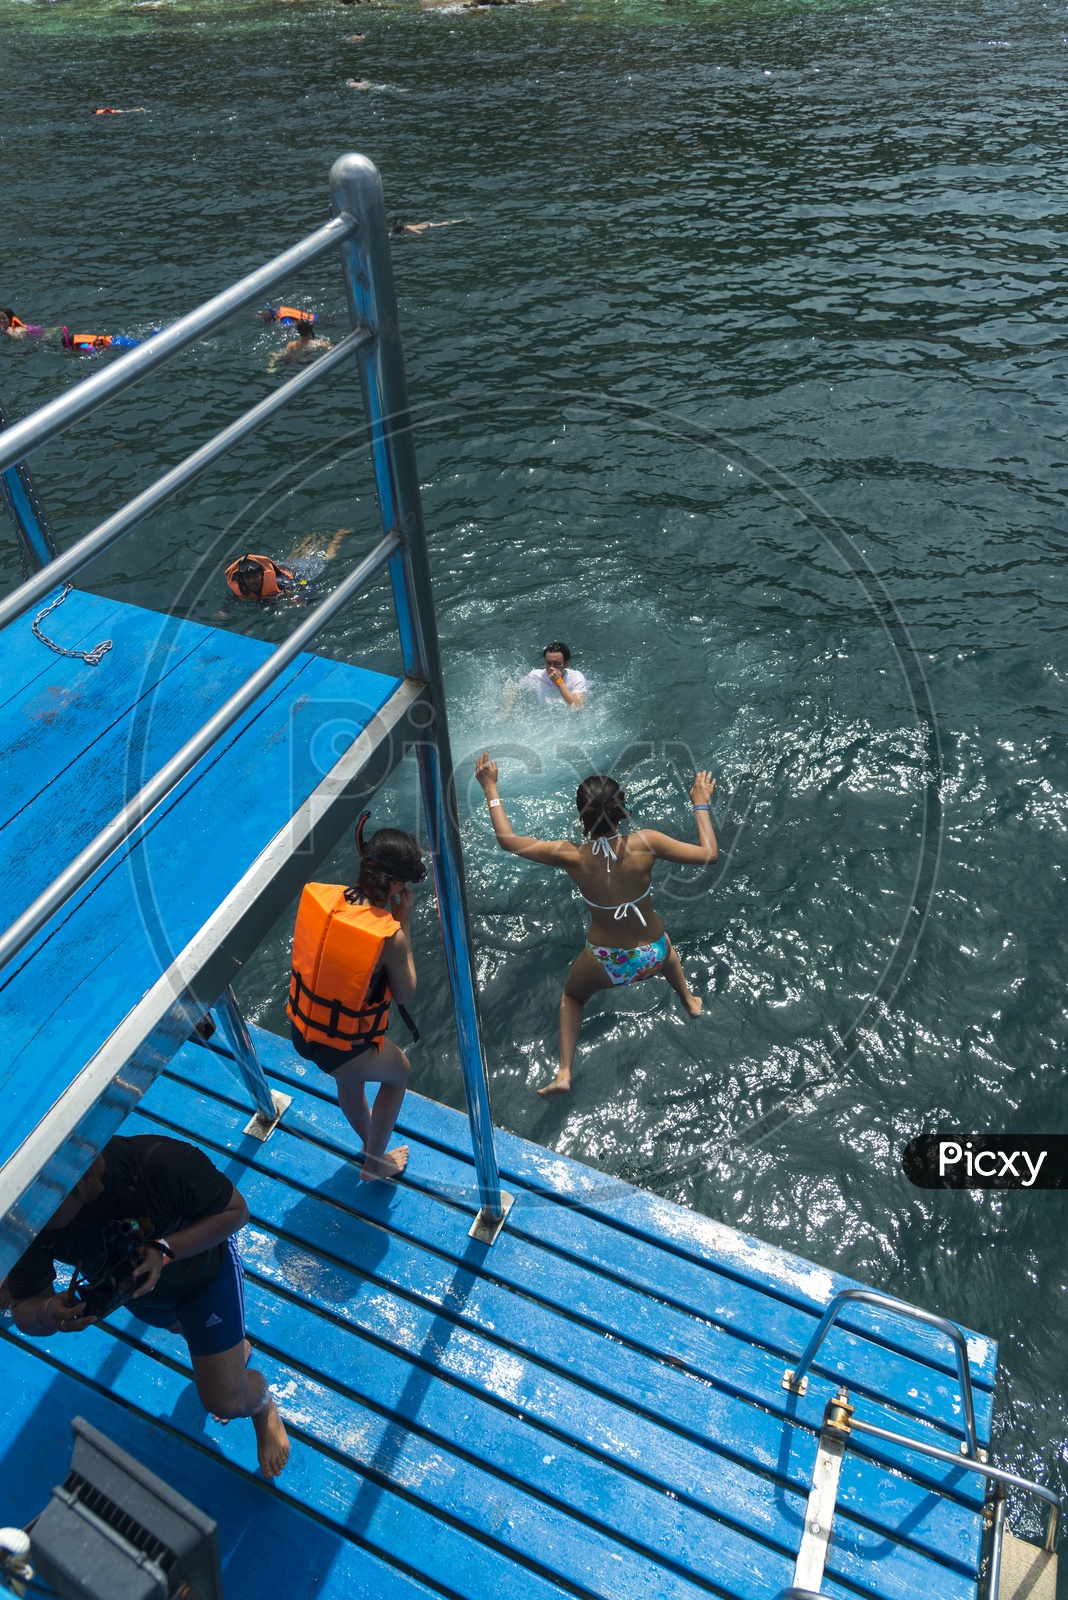 Tourists Jumping Into Sea From Boats For Swimming In Sea At Phuket